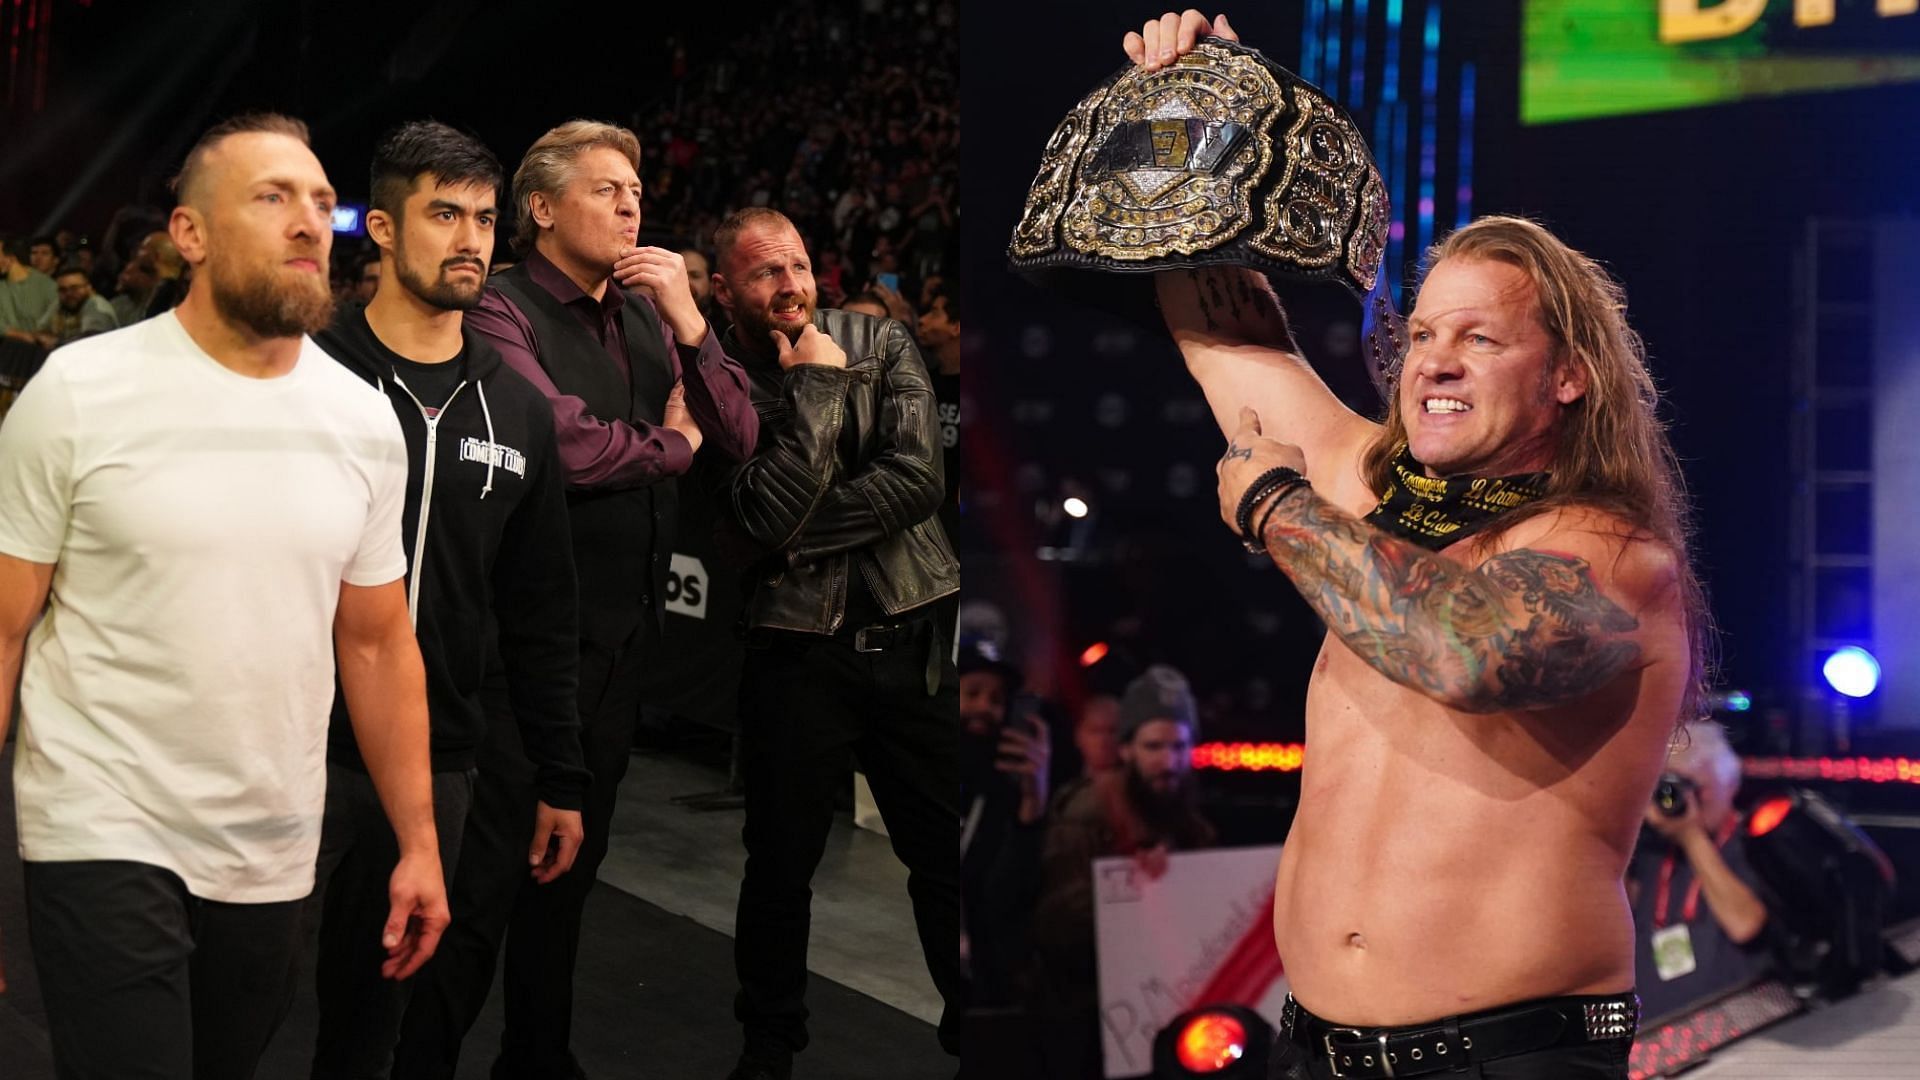 Chris Jericho breaks character to make a bold prediction regarding a top star who recently faced Blackpool Combat Club members